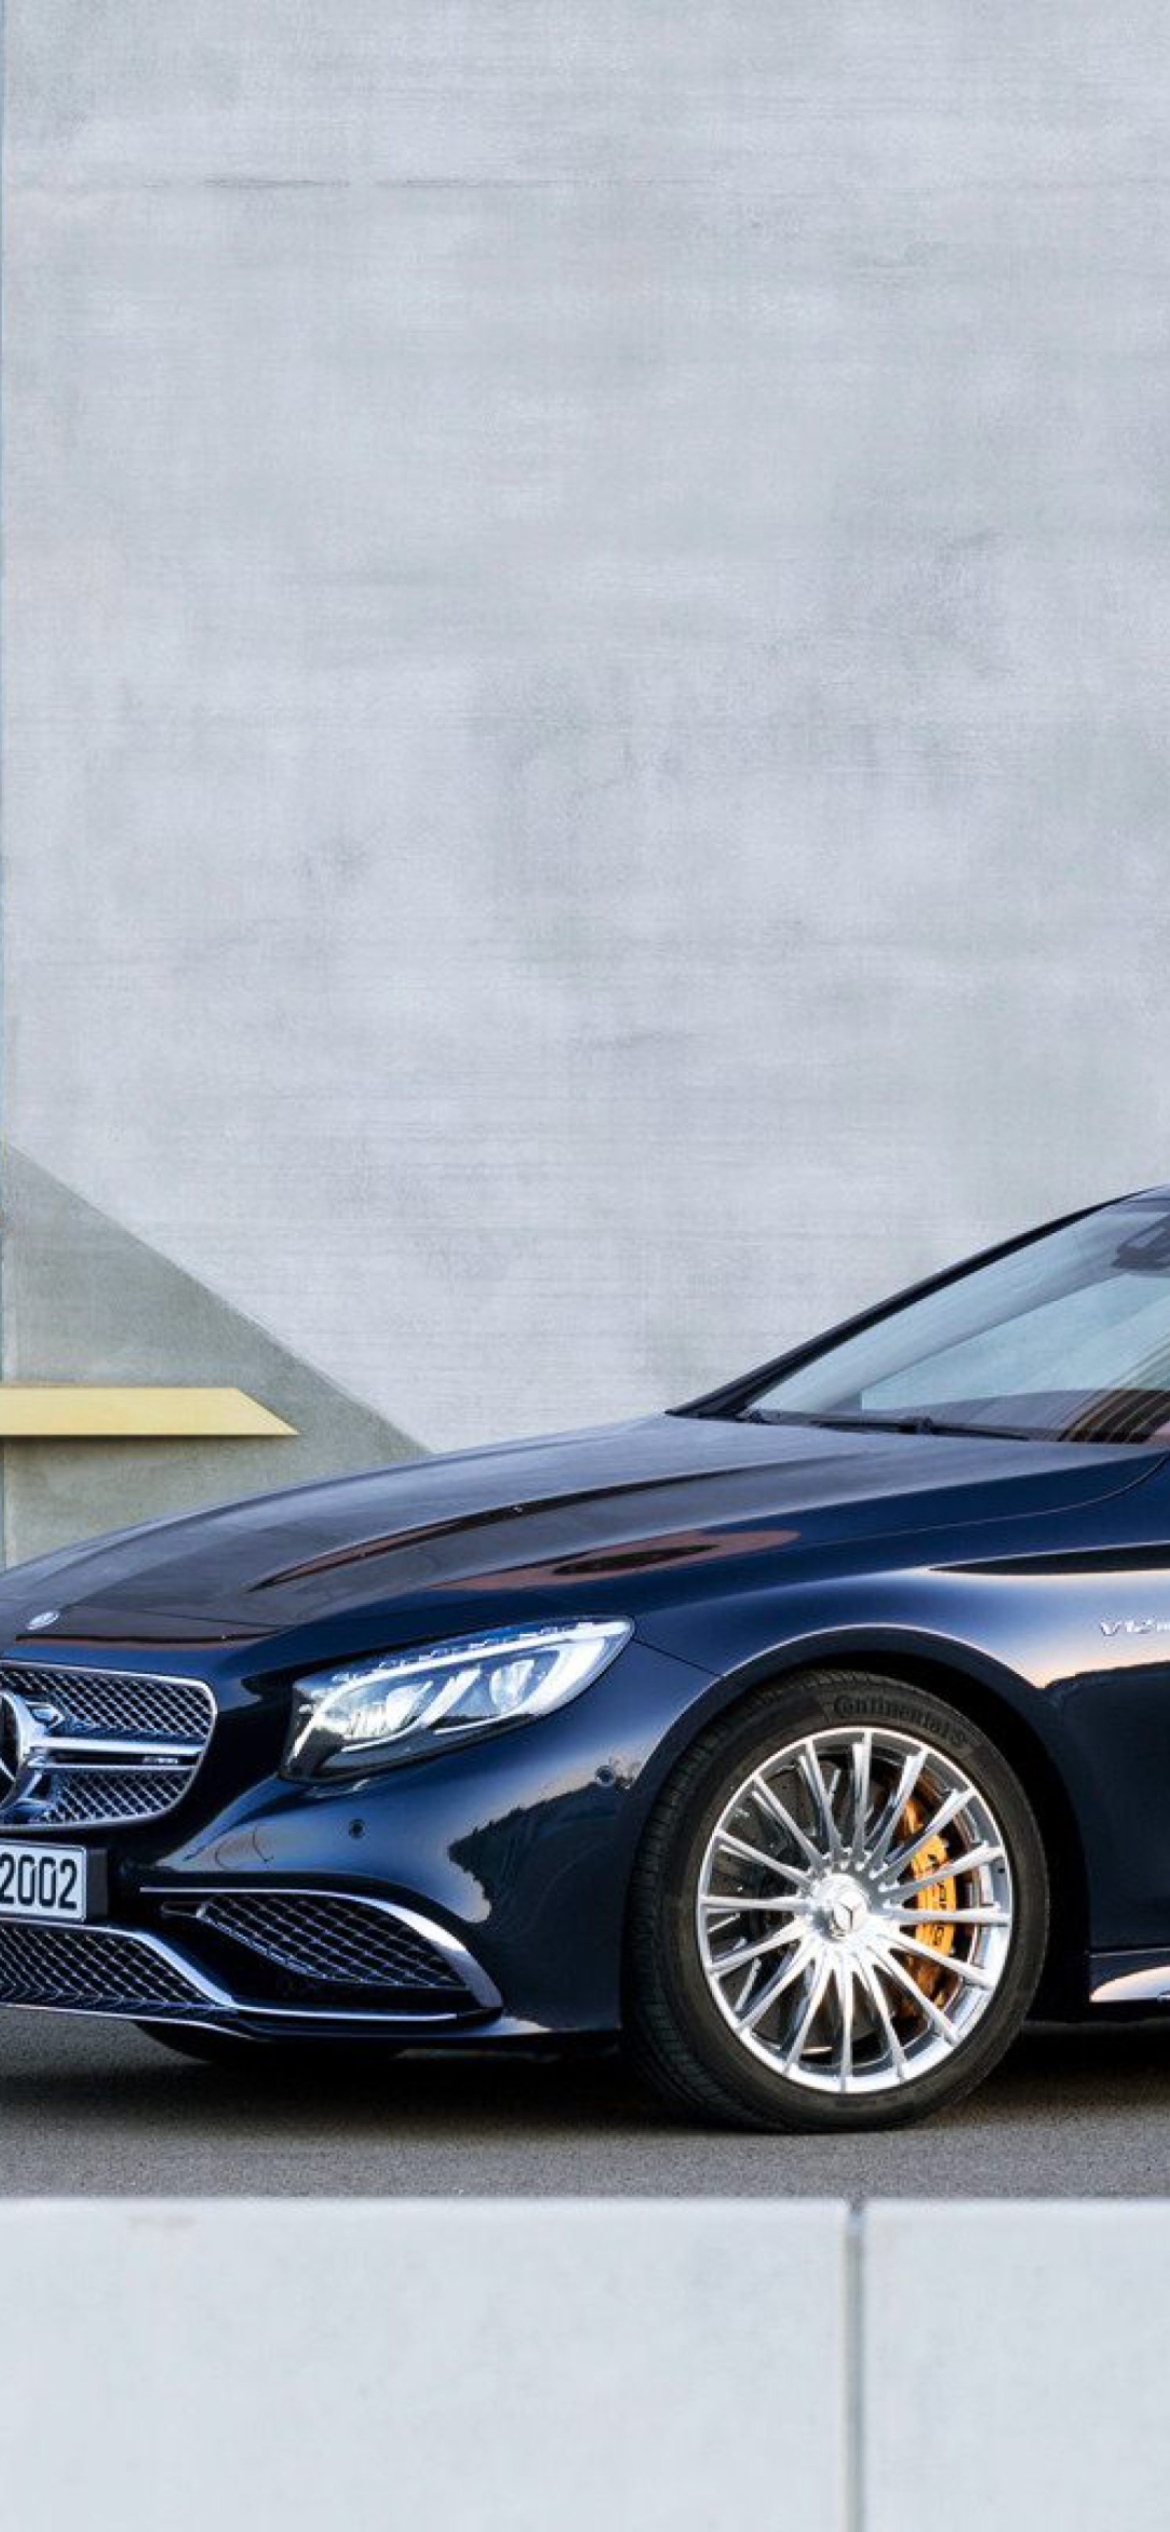 Mercedes-Benz S65 AMG Coupe wallpaper 1170x2532